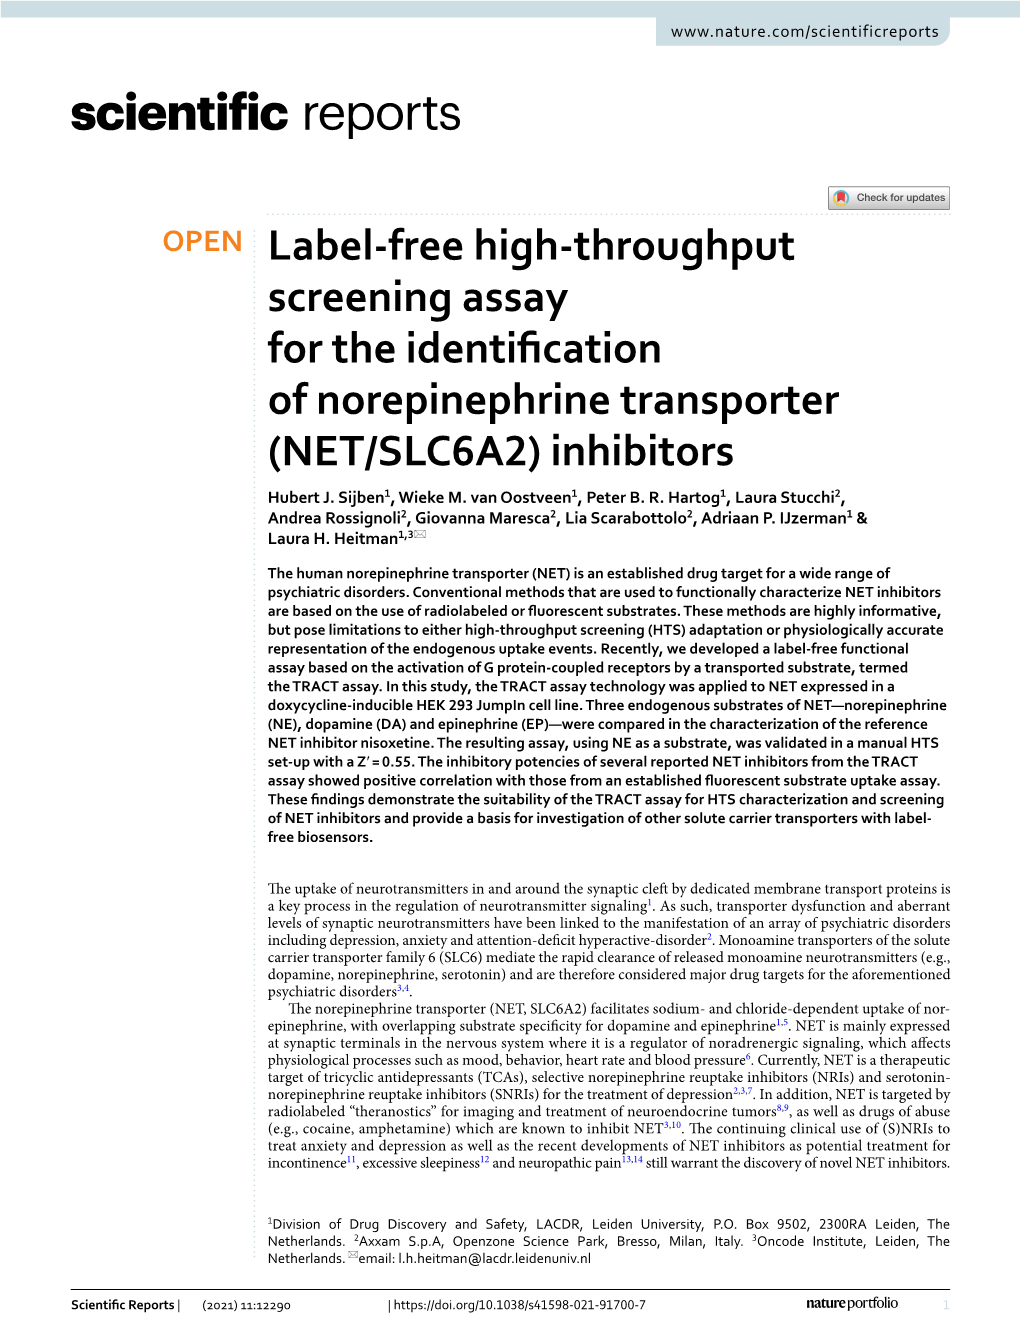 Label-Free High-Throughput Screening Assay for The